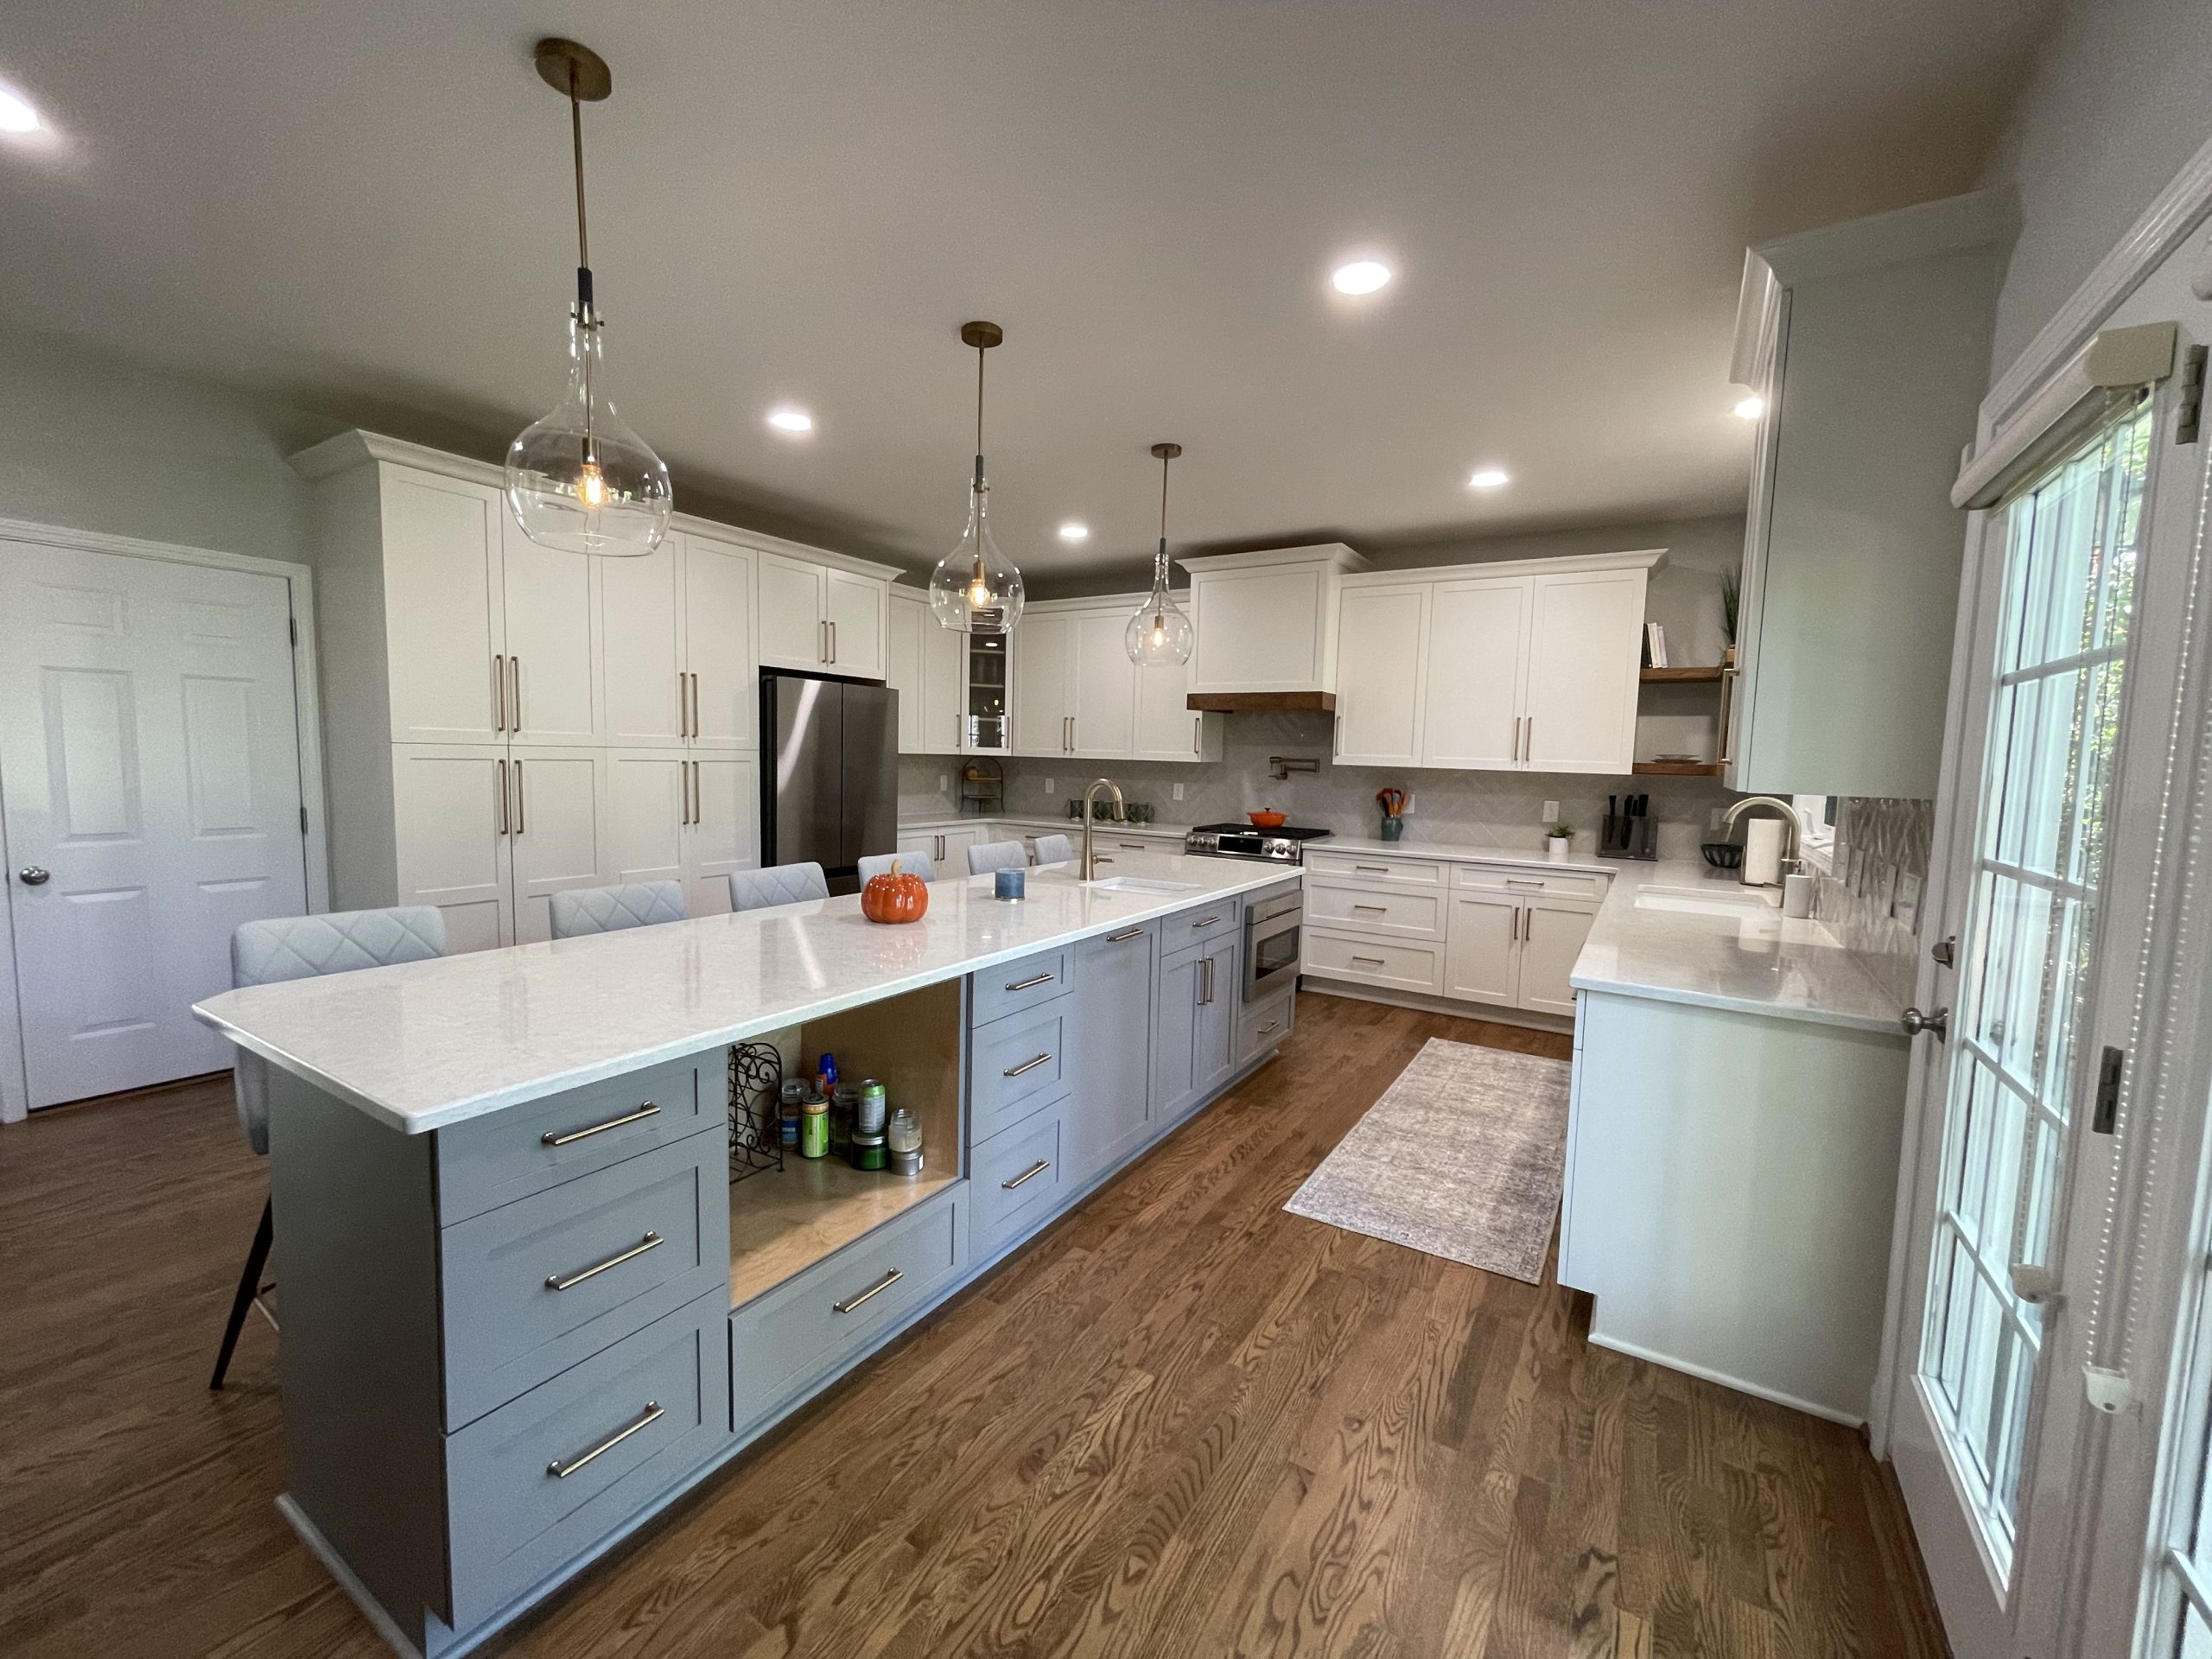 Full kitchen remodel with oversized island for lost of storage and seating in Cary, NC